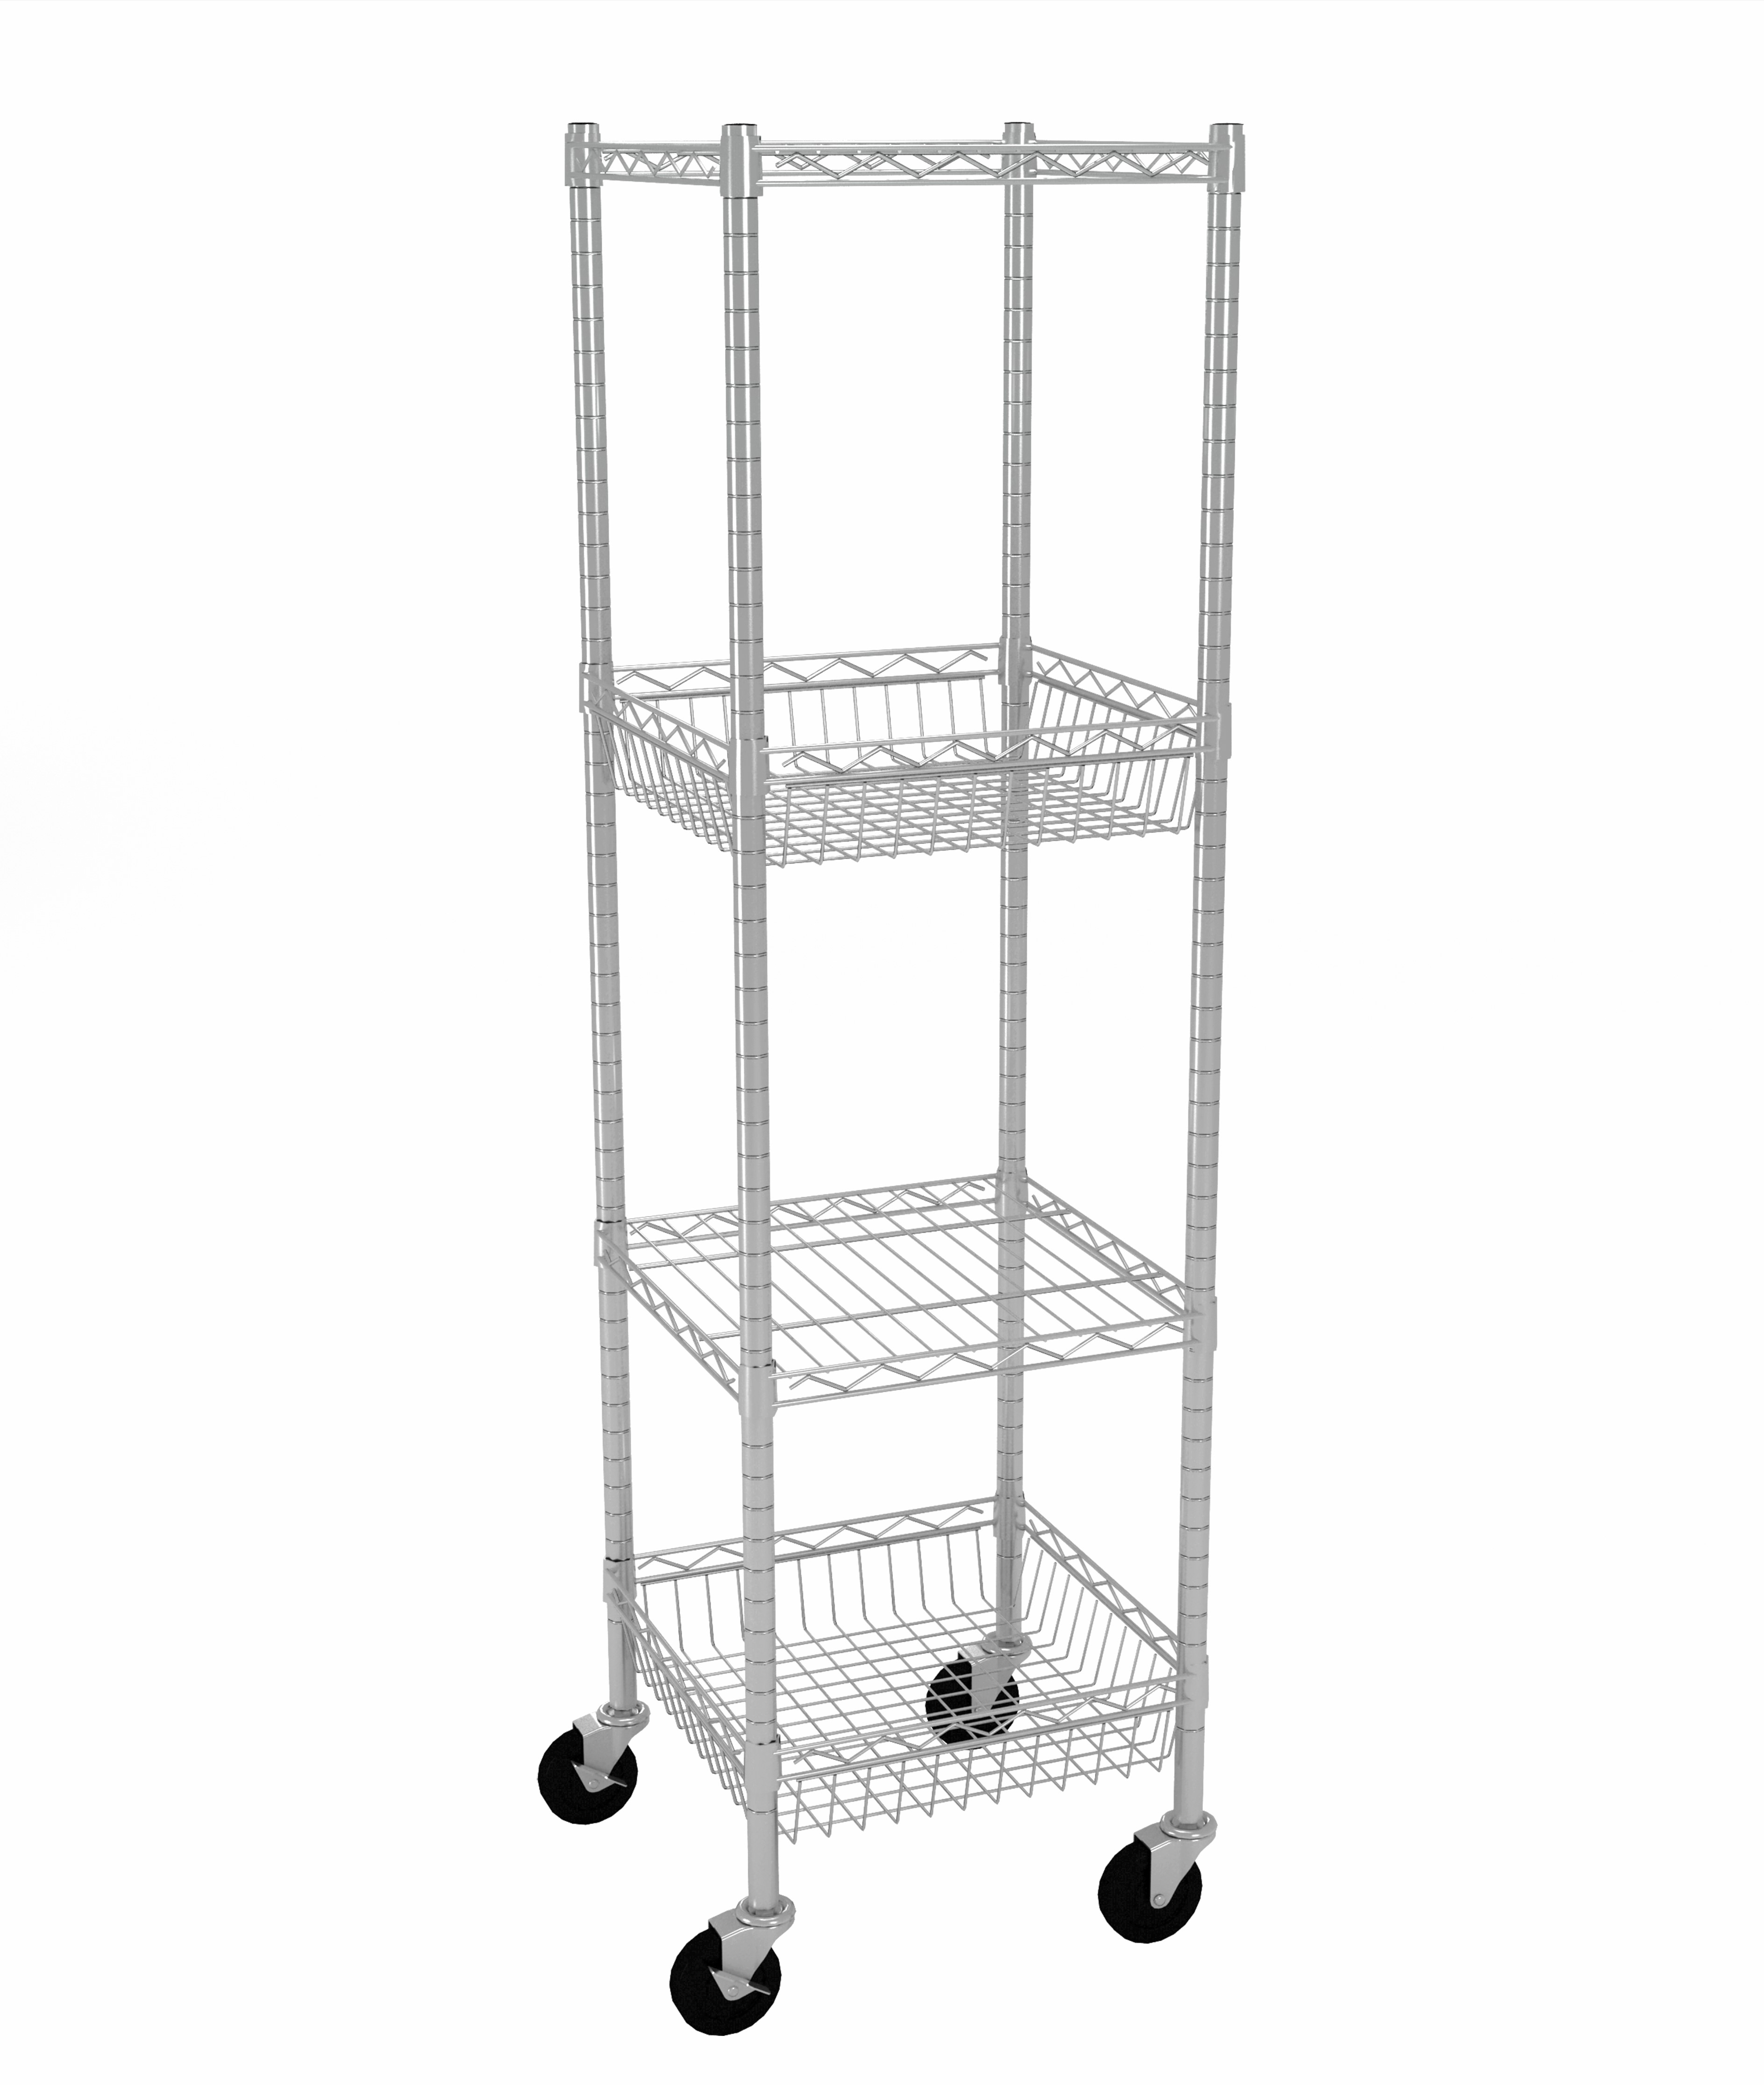 Hyper Tough 4 Shelf Steel Wire Shelving Tower with Caster 16"Dx16"Wx57.4"H, Chrome - image 3 of 6